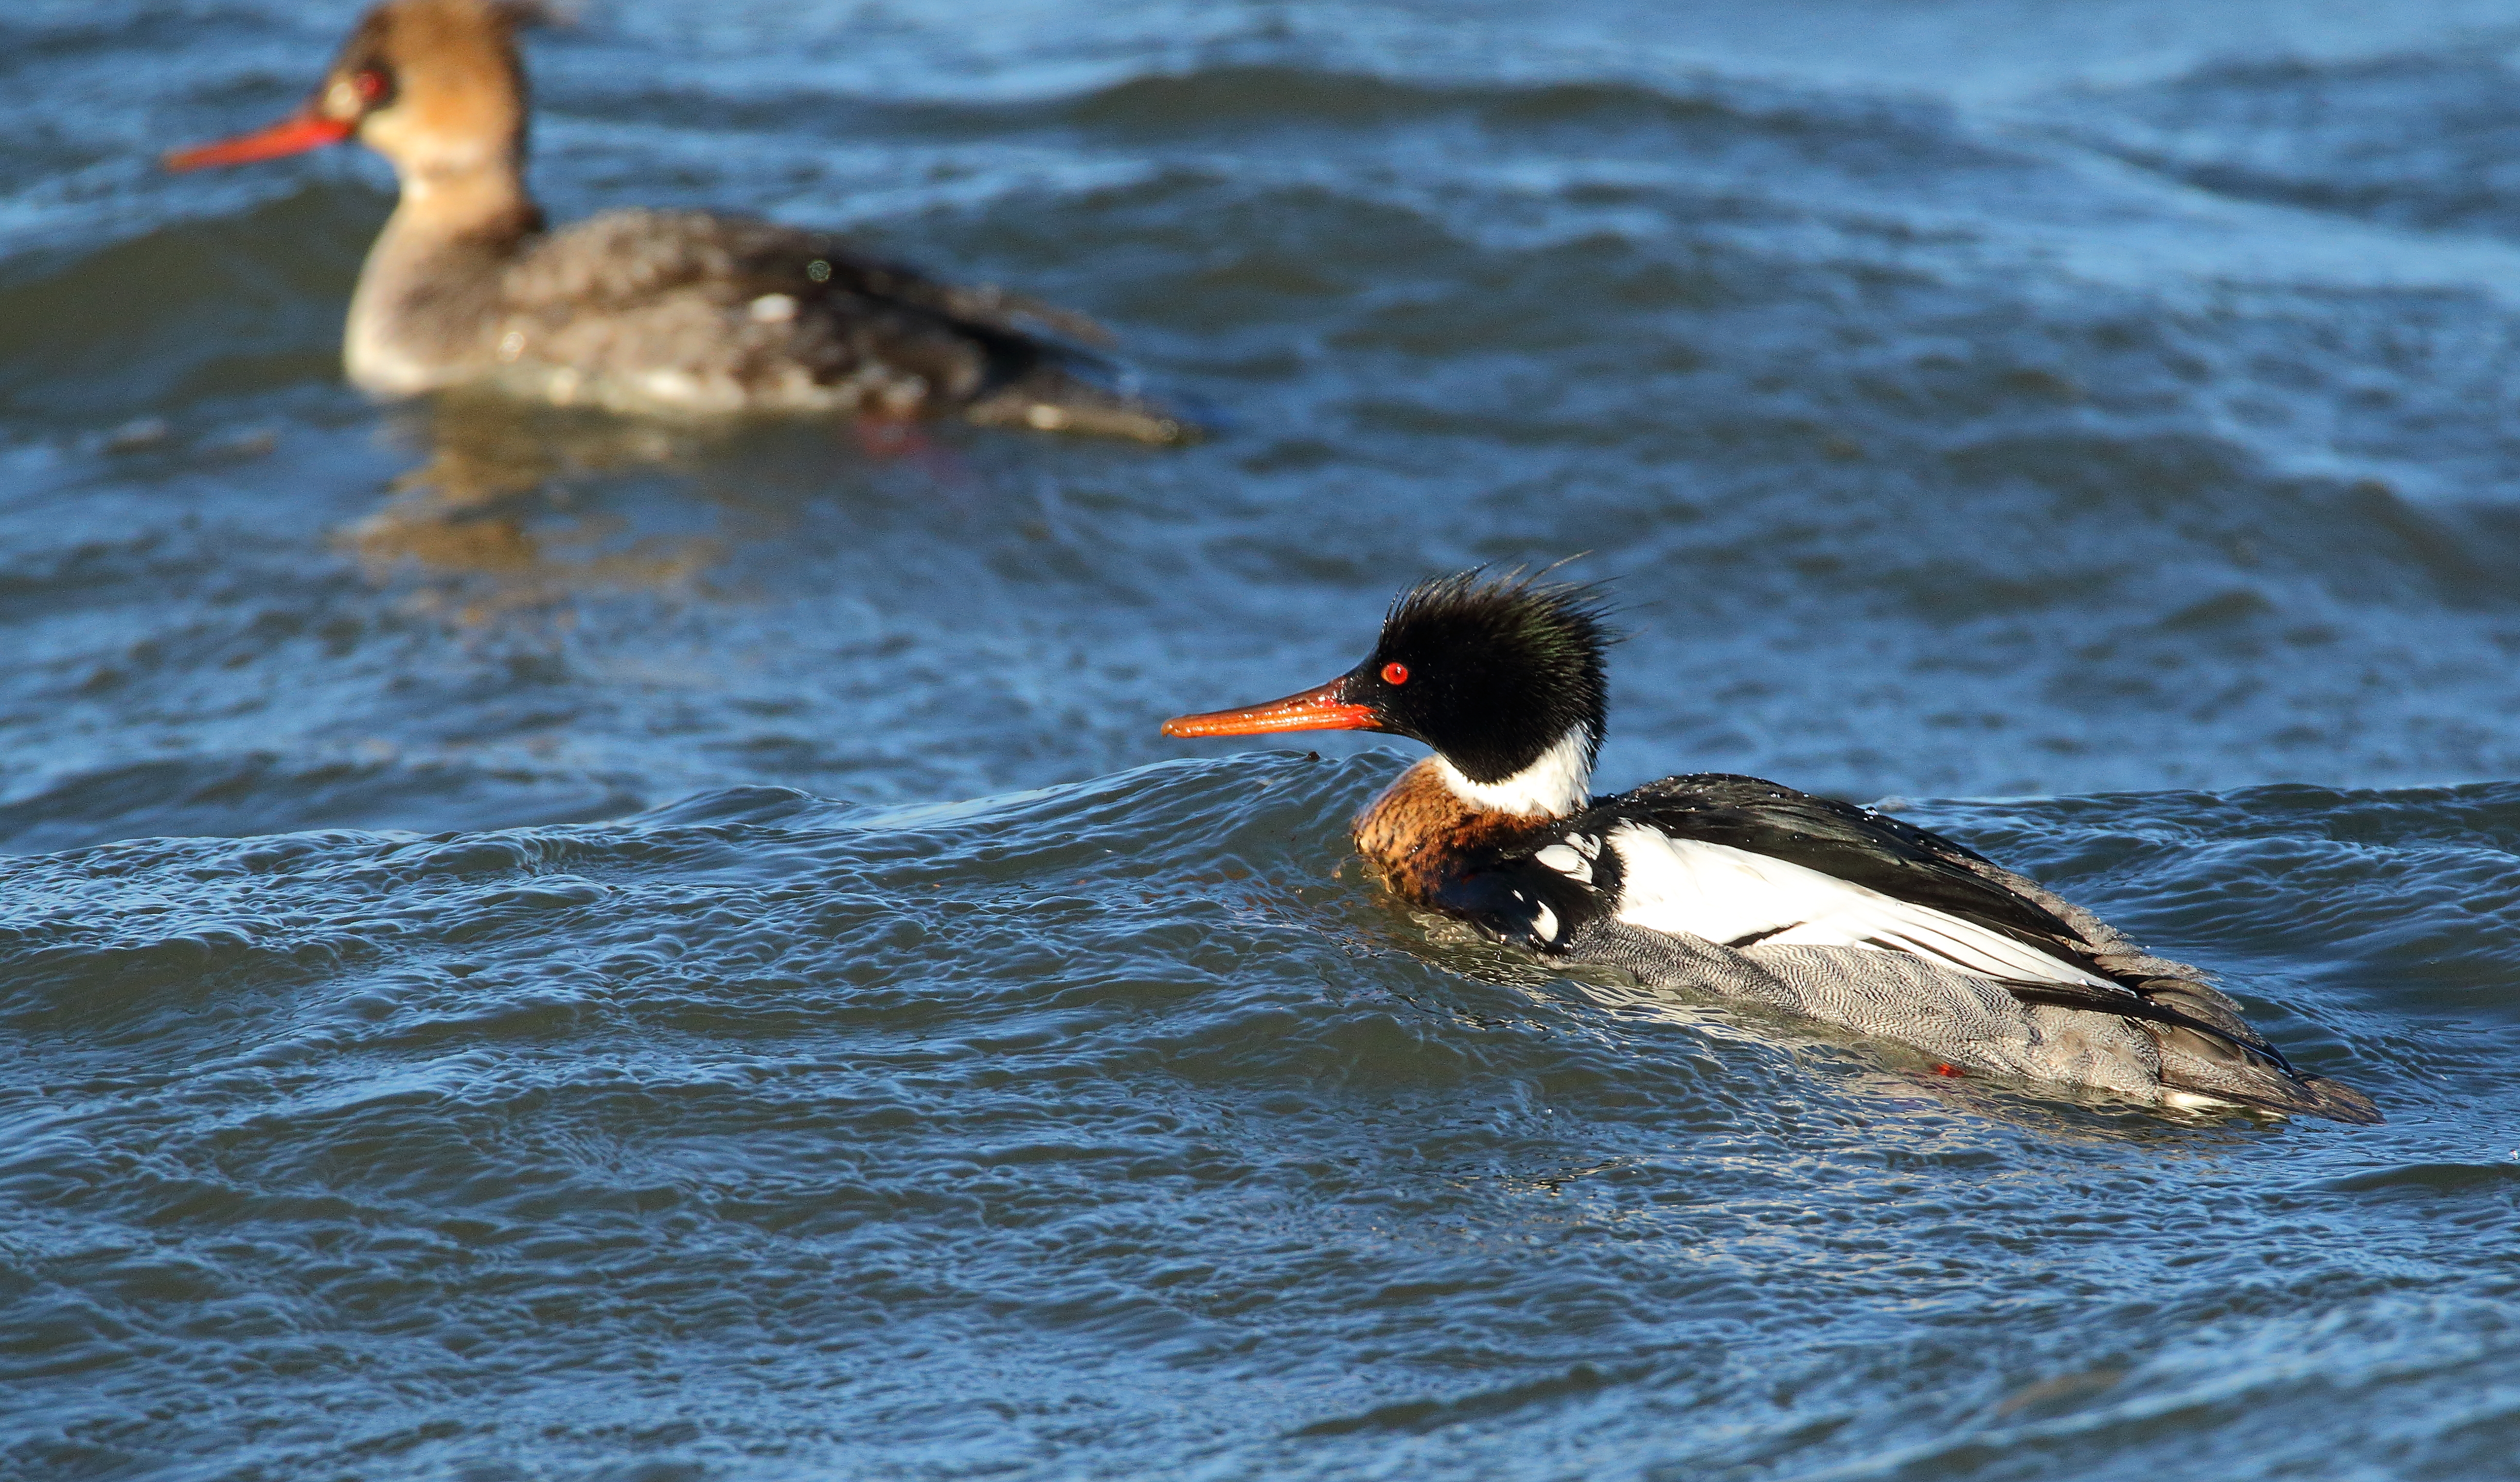 Red-breasted Mergansers are frequently seen along Manhattan’s southeastern shore in the wintertime. Photo: <a href="https://www.flickr.com/photos/120553232@N02/" target="_blank">Isaac Grant</a>